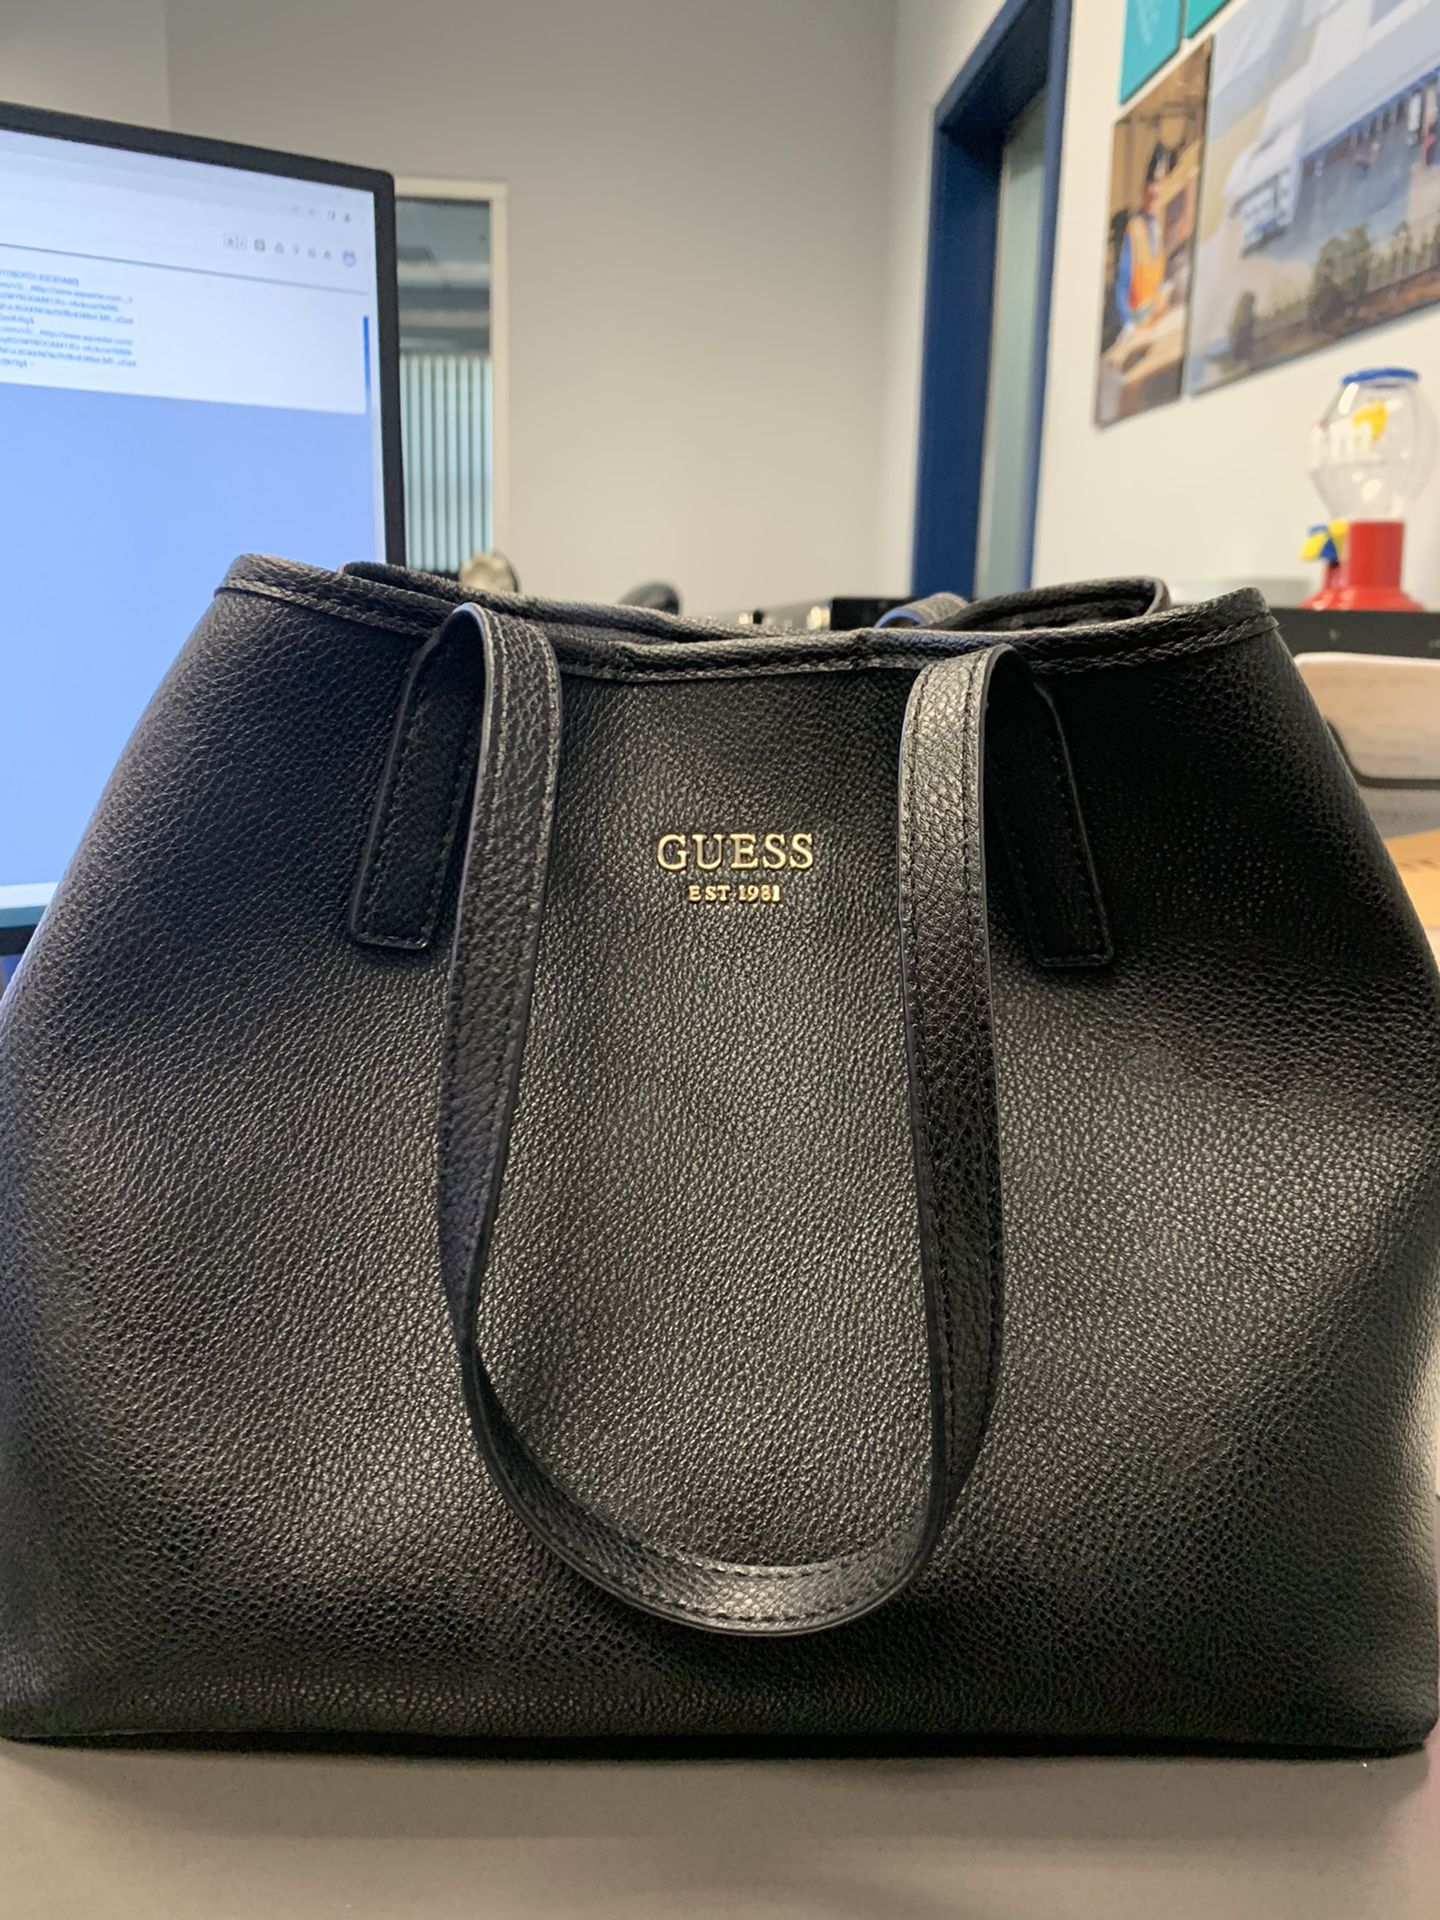 Guess Vikky Tote for Sale in Downey, CA - OfferUp